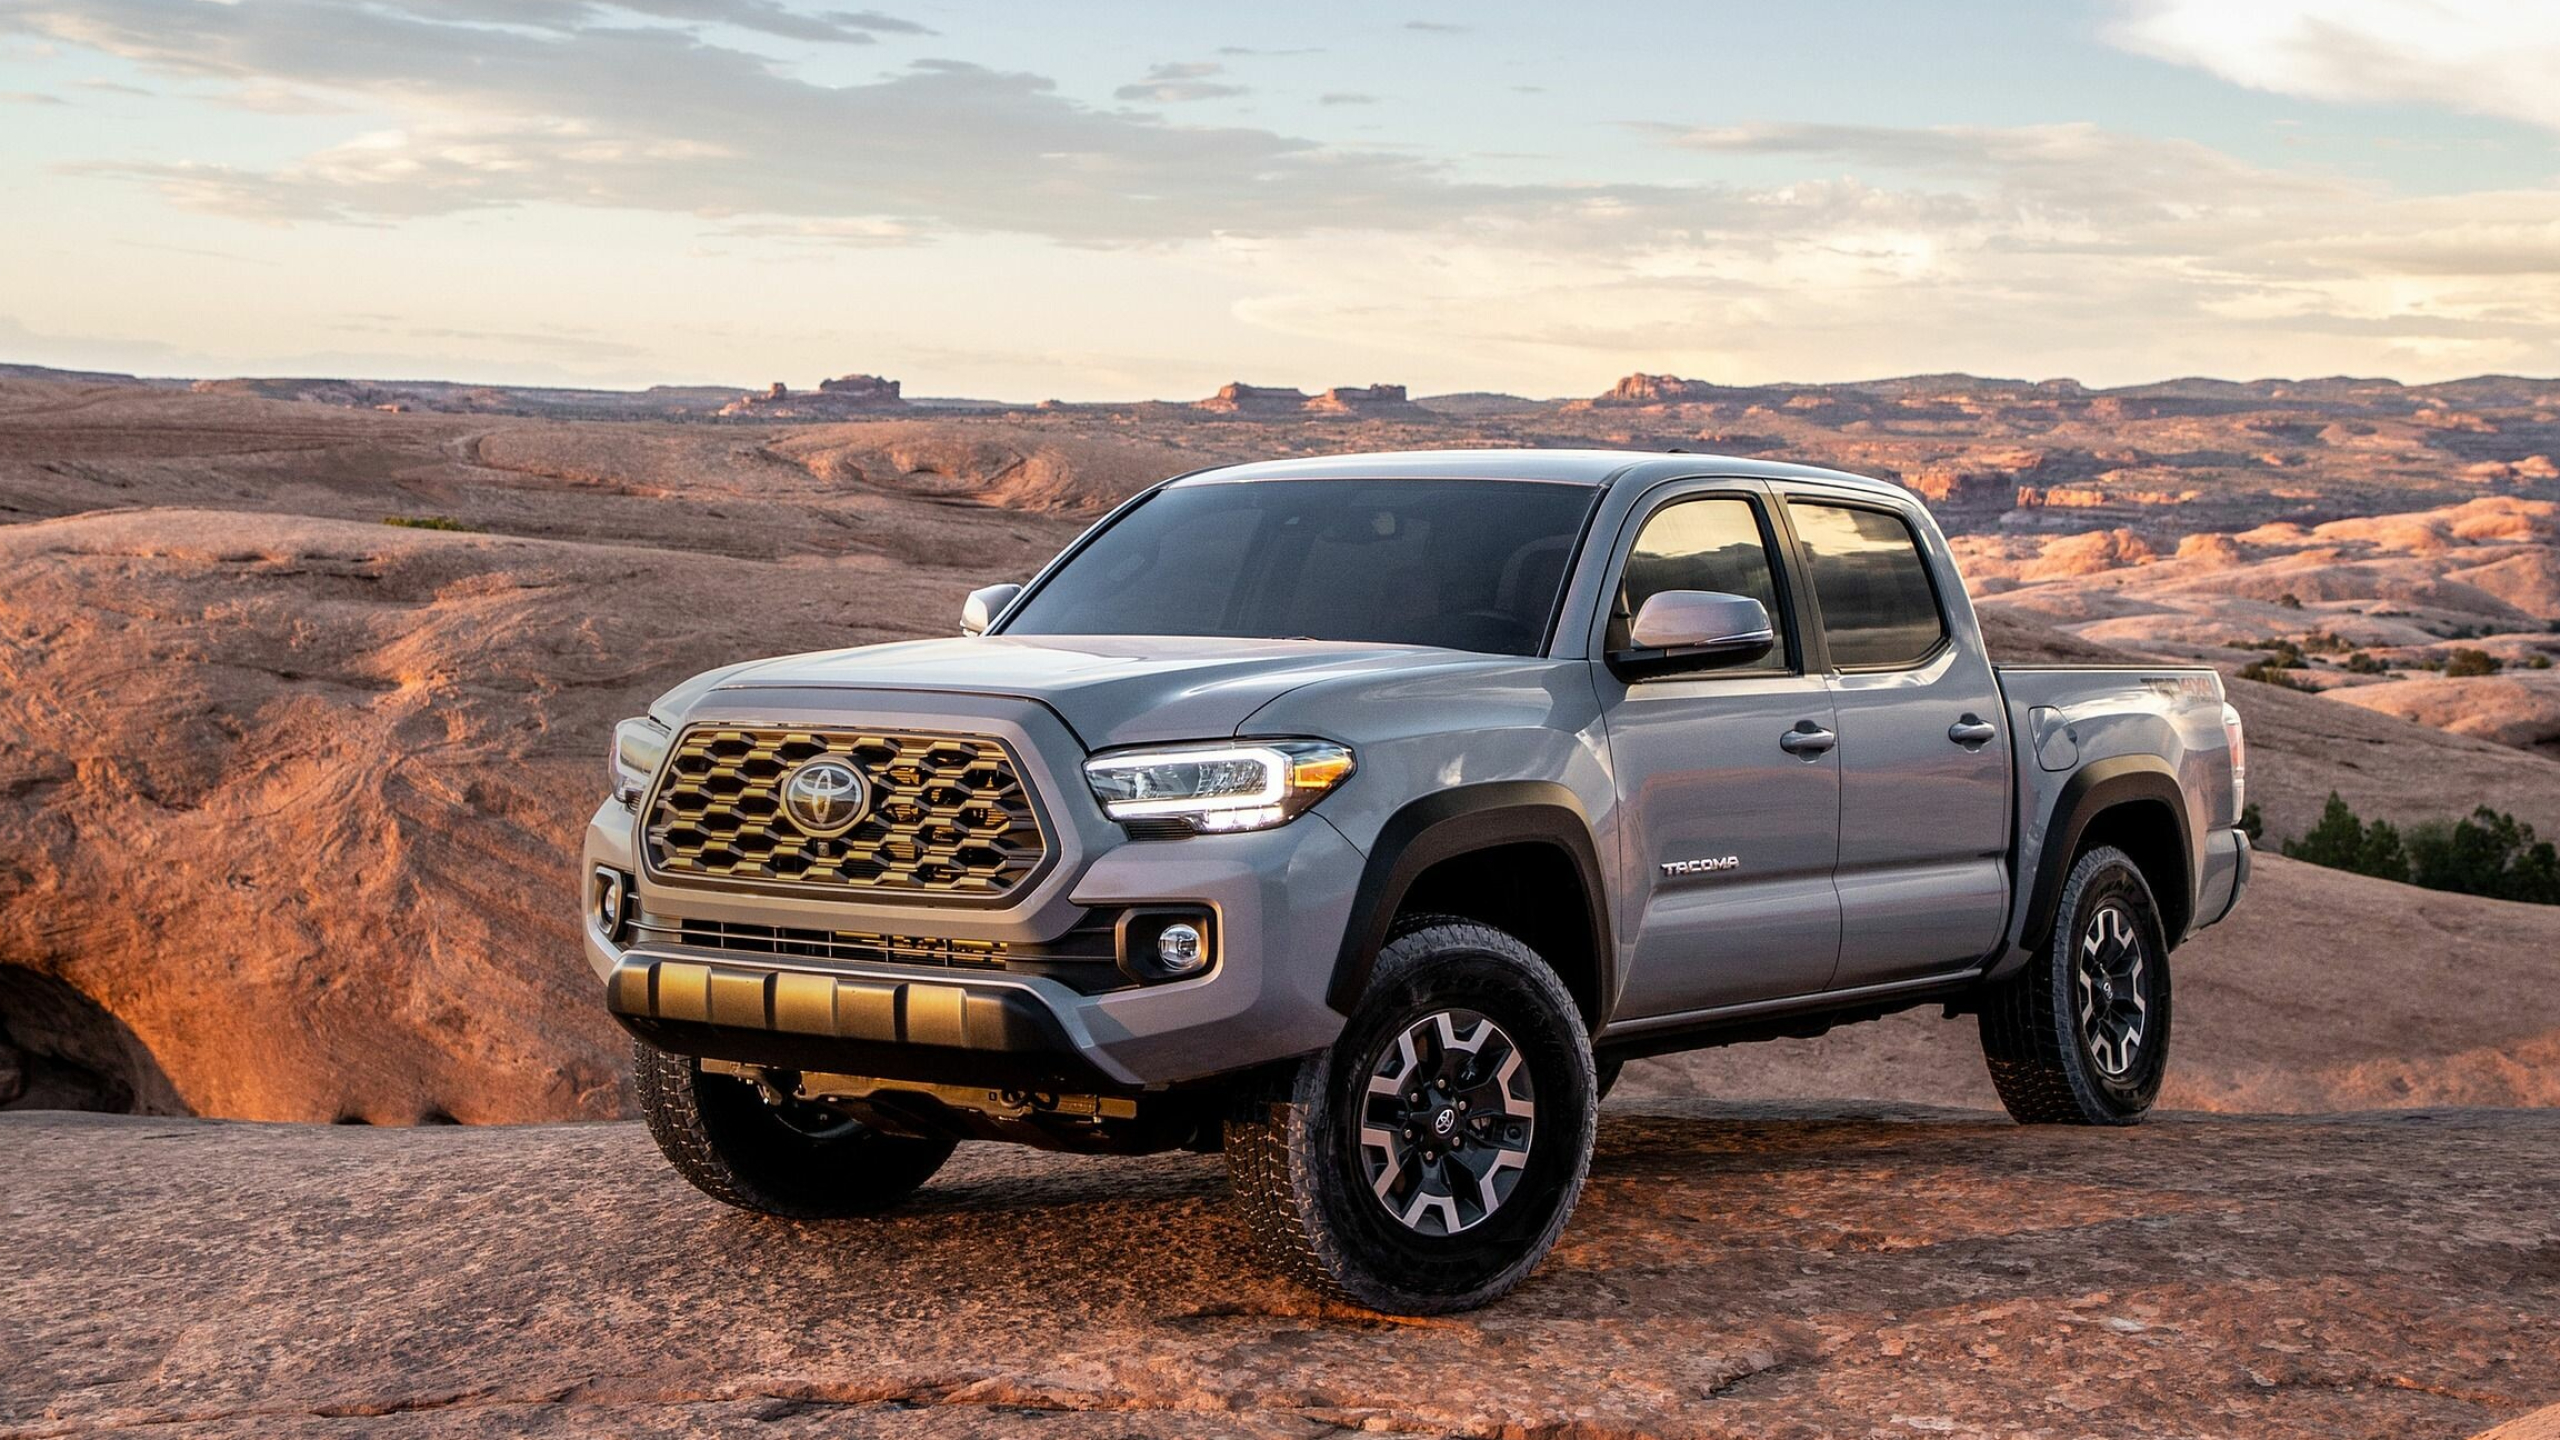 Toyota Tacoma: The development of the second generation began in 2000. 2560x1440 HD Background.